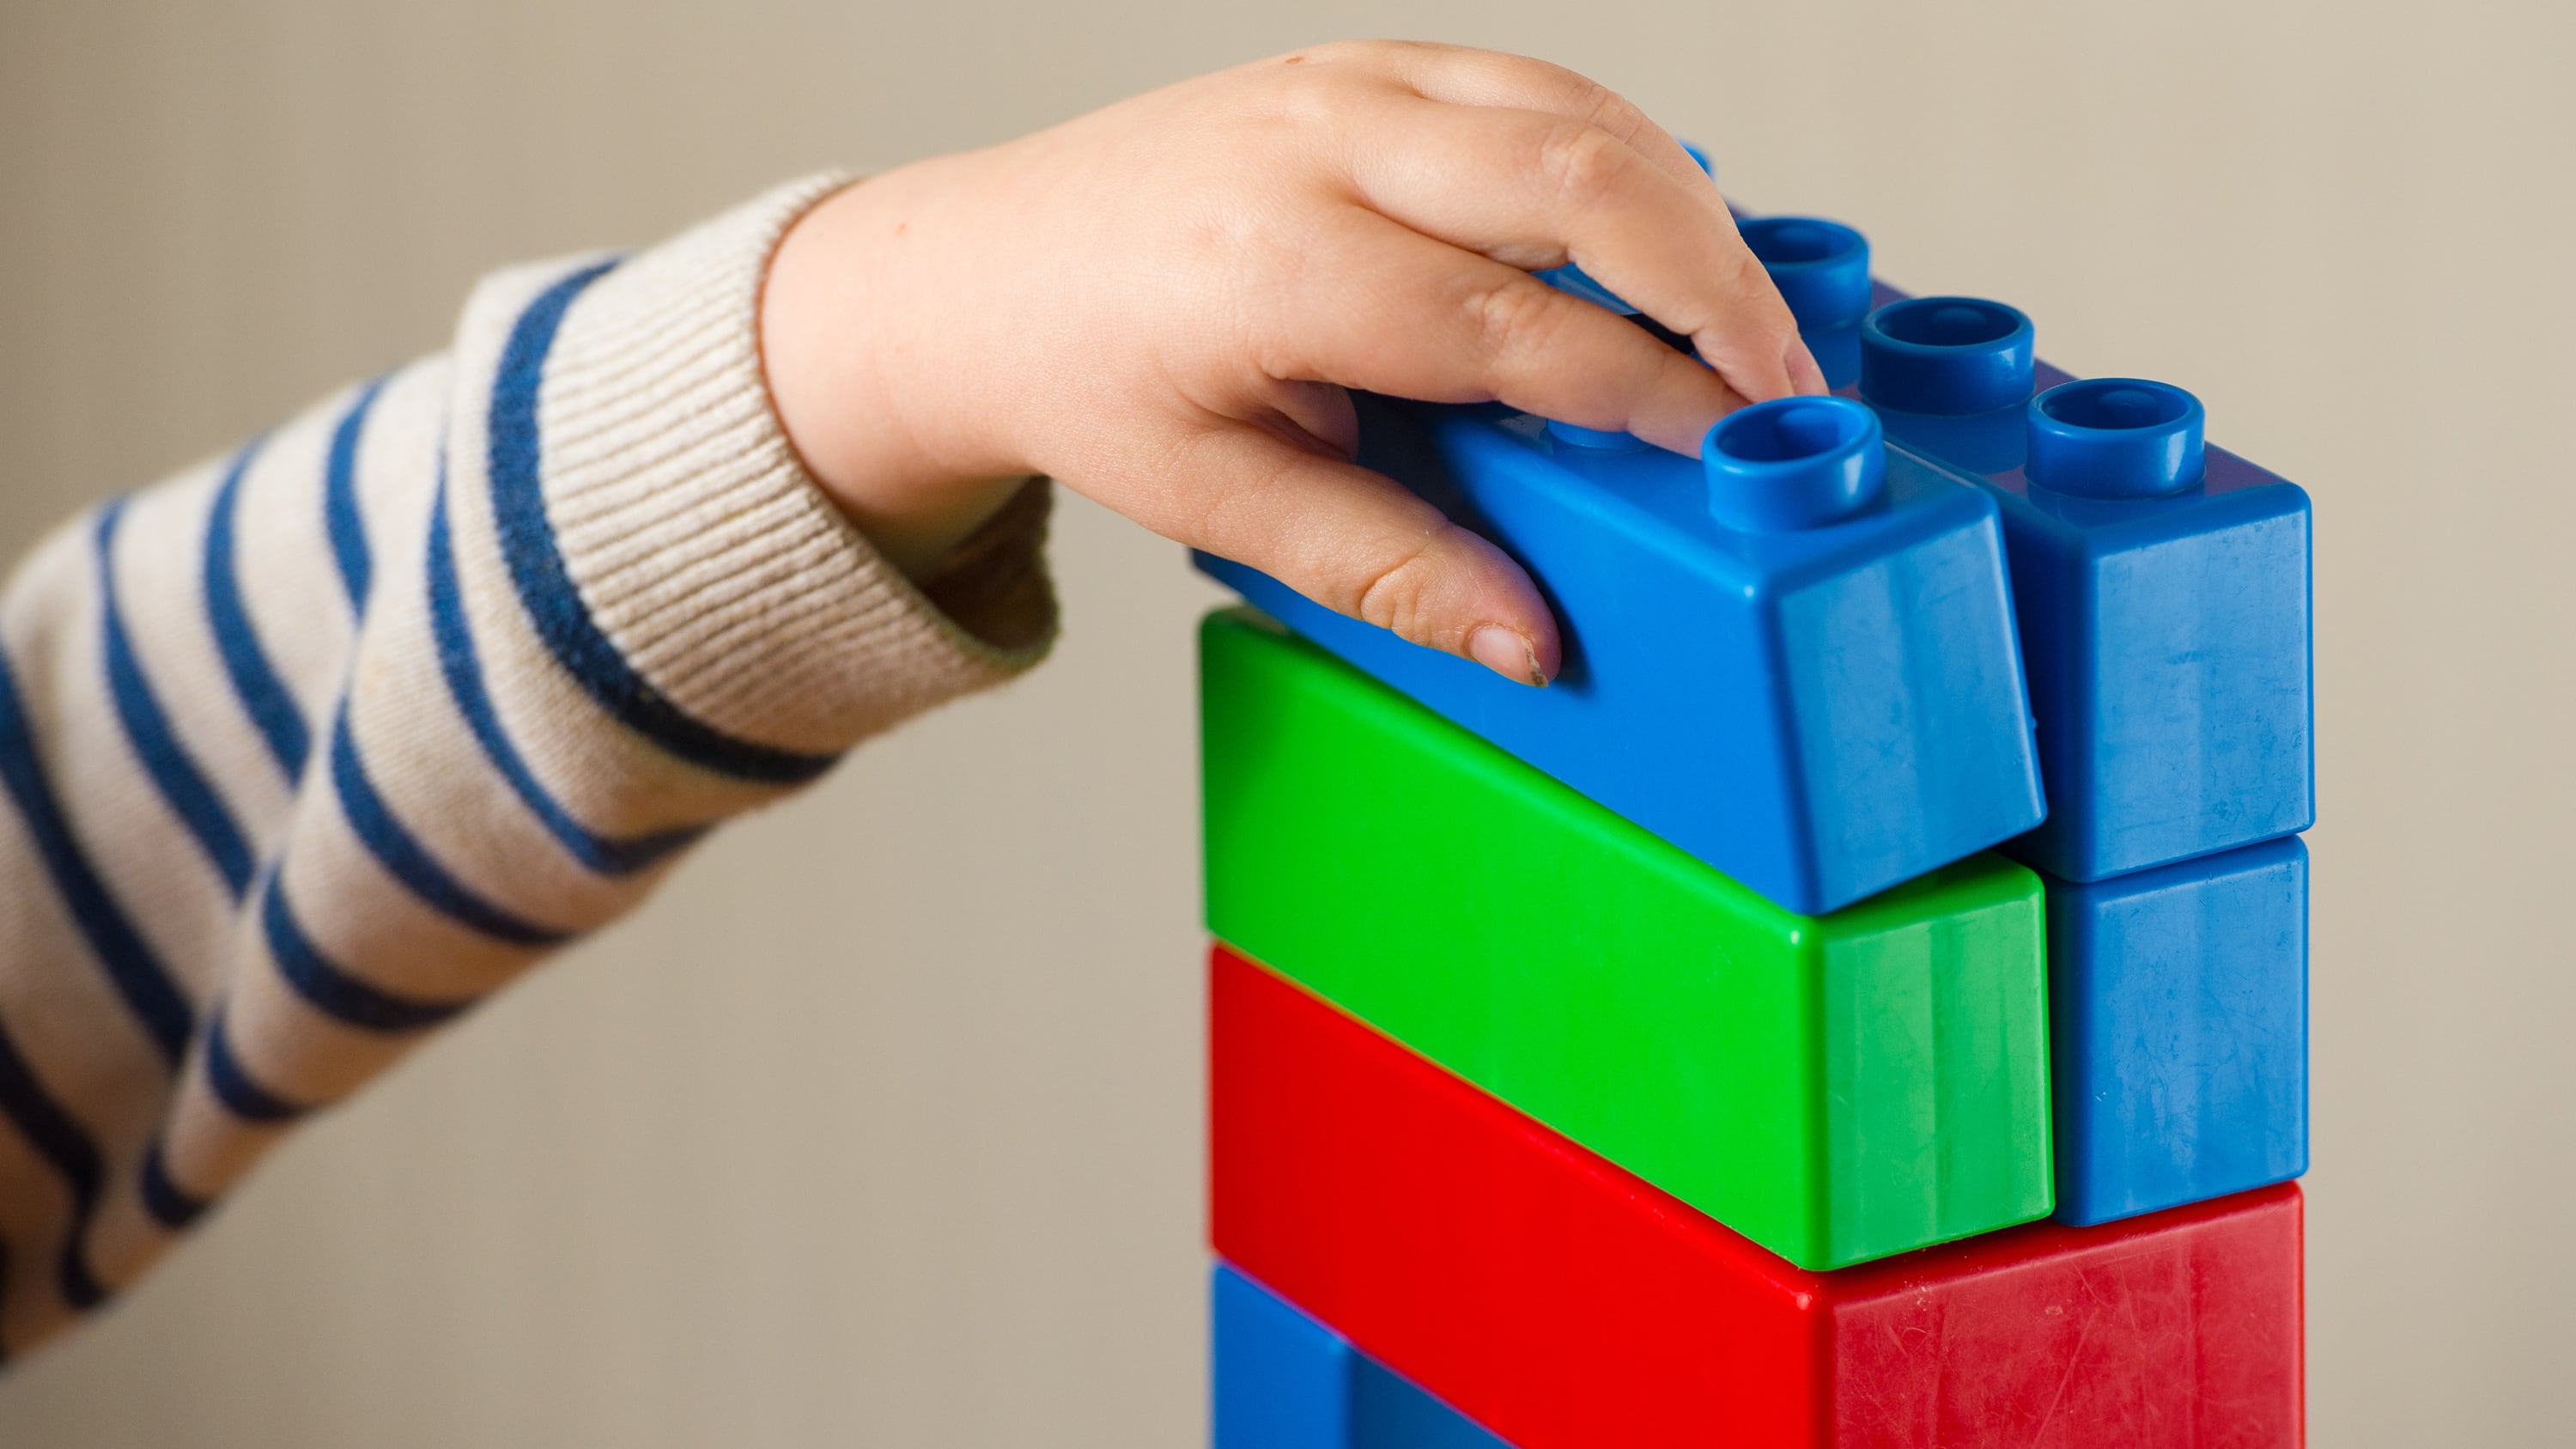 Affluent areas in England have the highest levels of childcare access, an analysis suggests